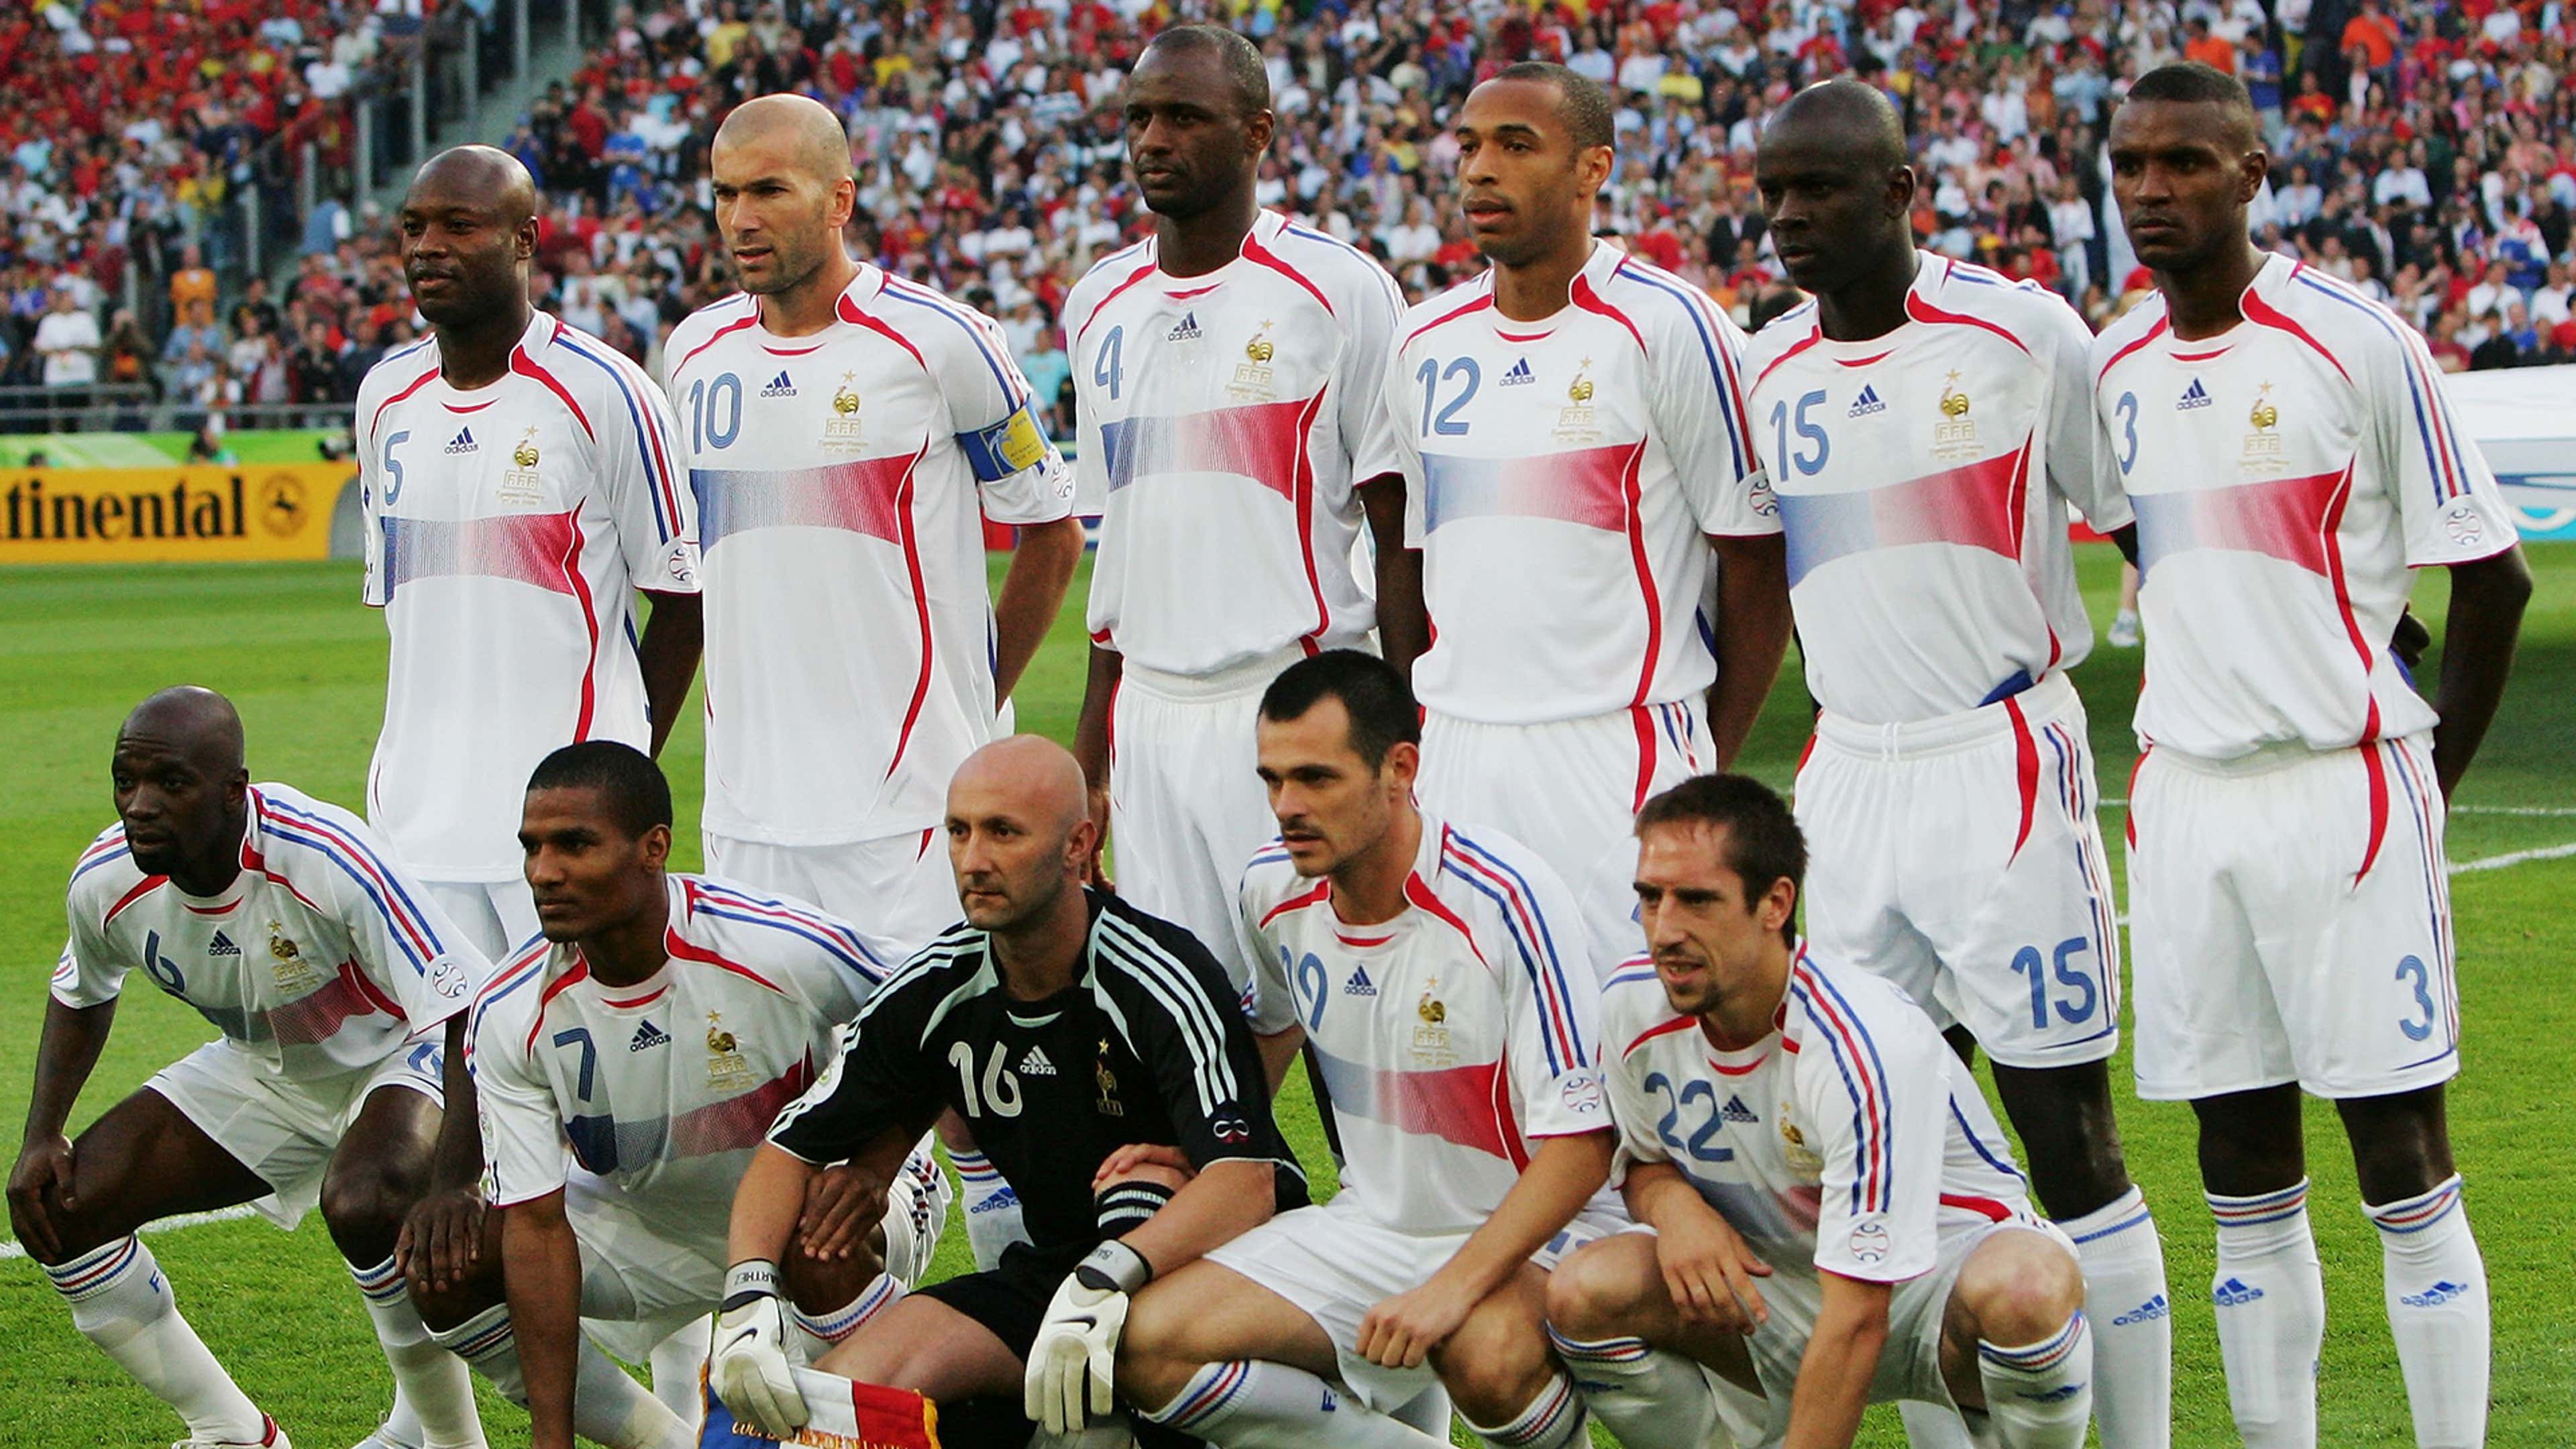 France (Retro) 2006 World cup final